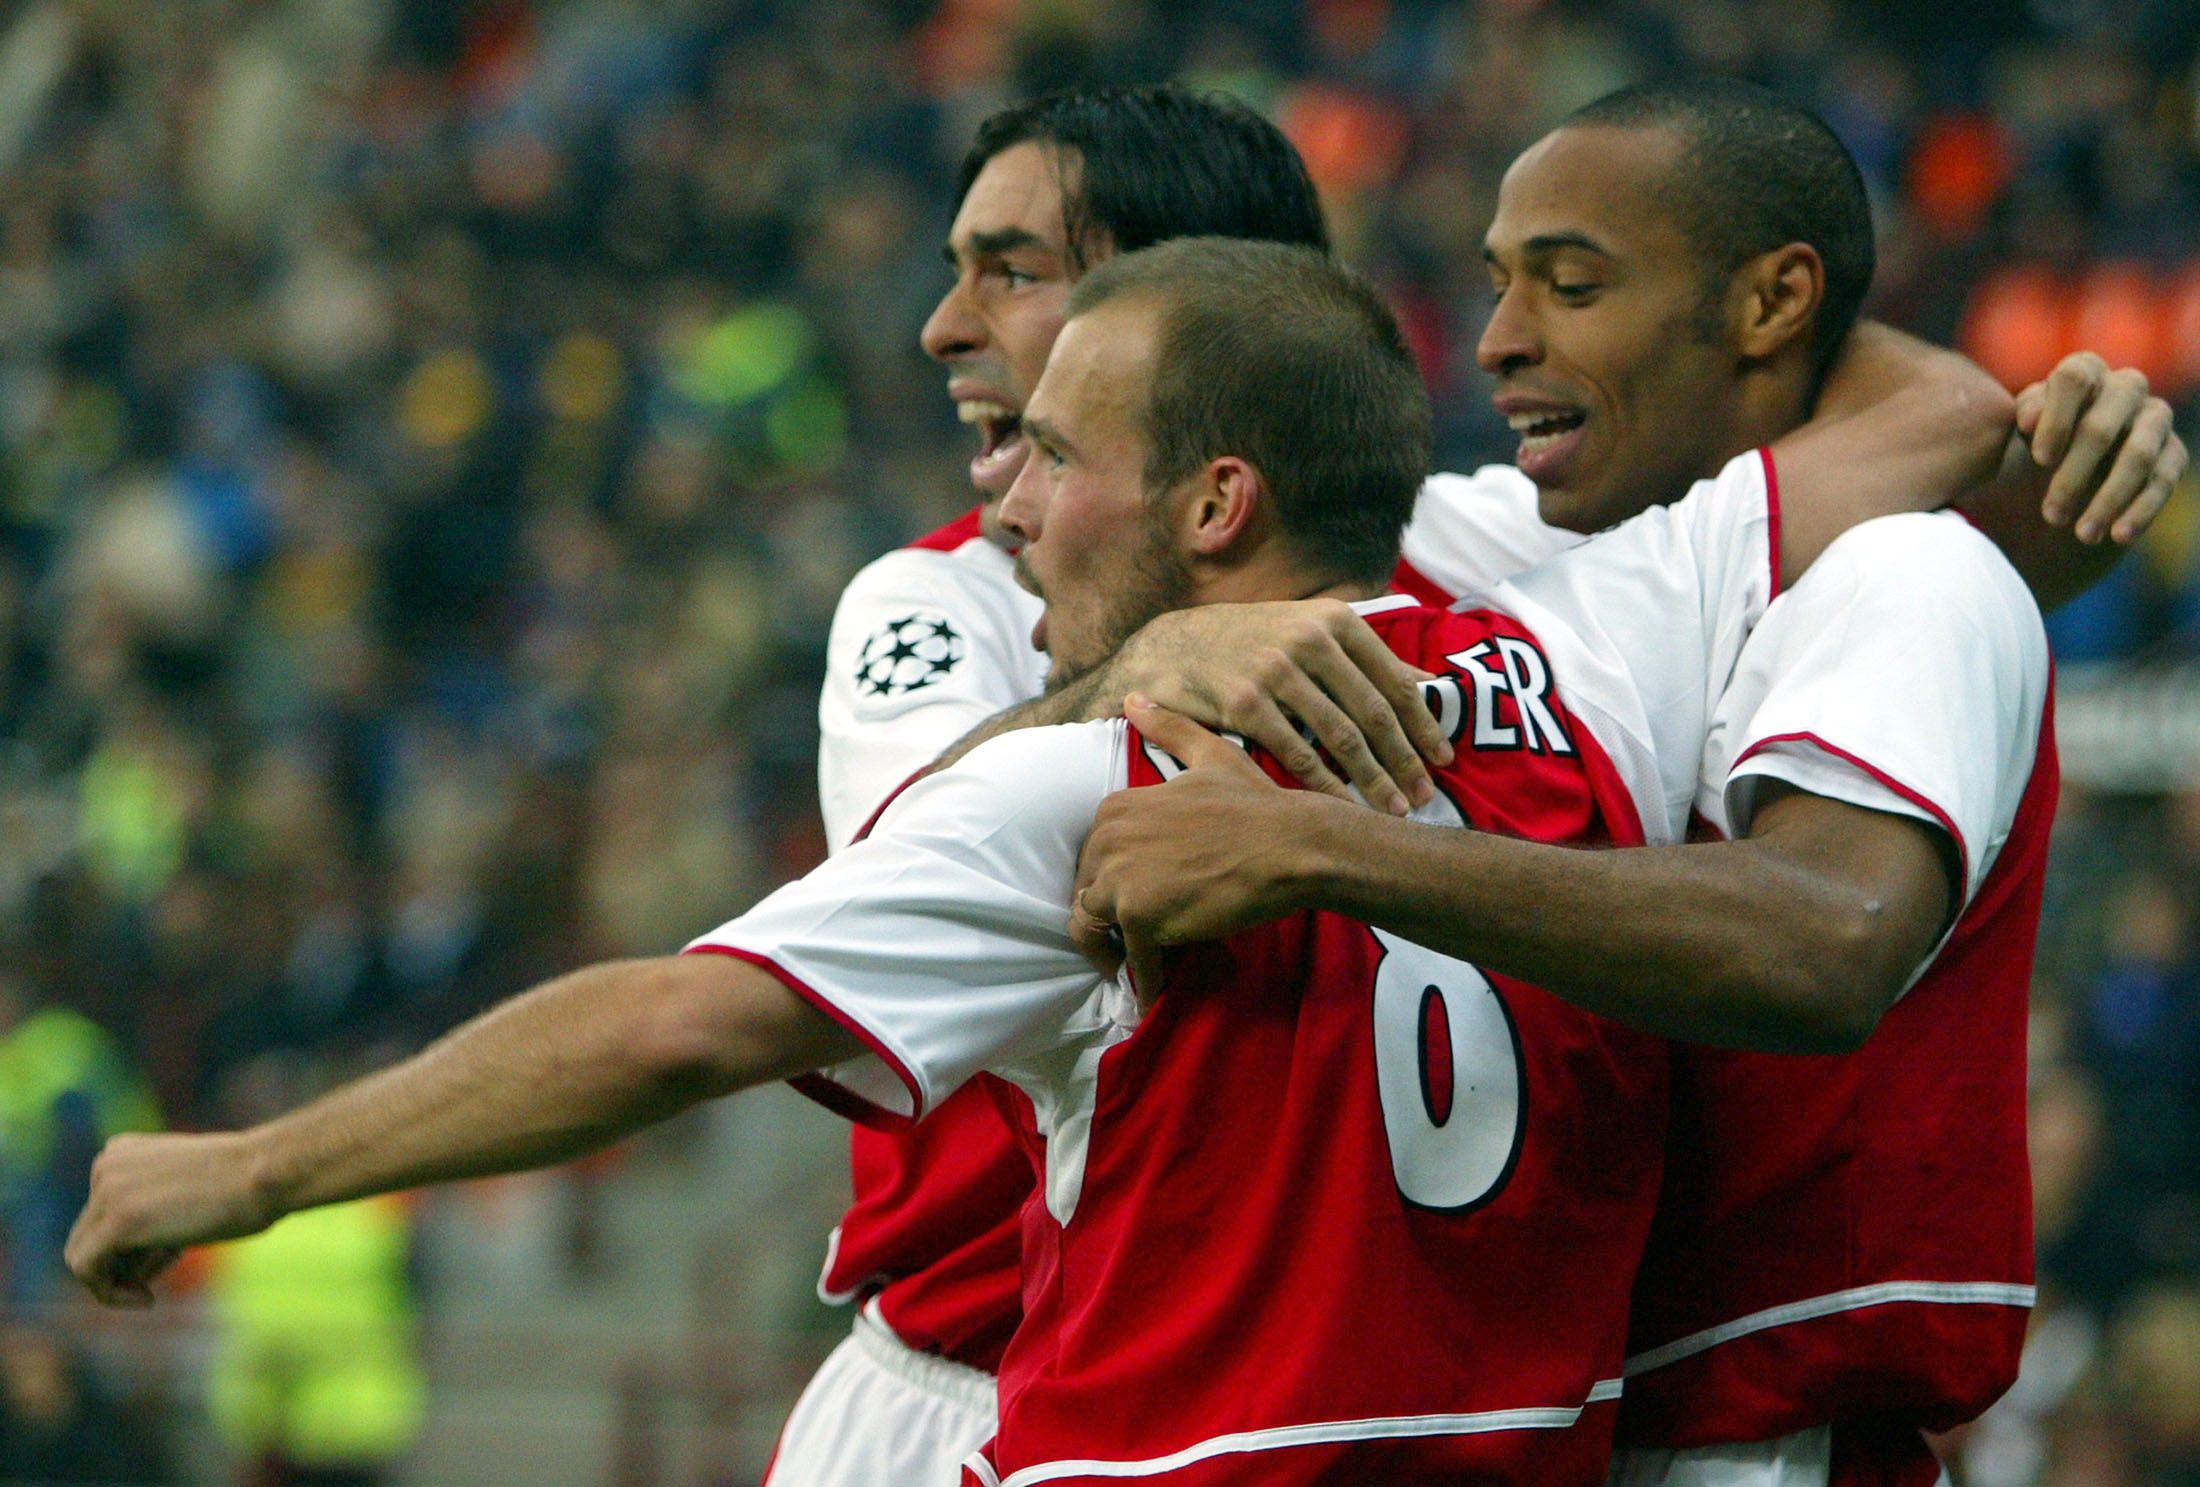 Arsenal's Fredrik Ljungberg (C) celebrates with team mates Robert Pires
(L) and Thierry Henry after scoring against Inter Milan during their
Champions League Group B first phase match at the San Siro Stadium in
Milan, November 25, 2003. REUTERS/Stefano Rellandini

SR/WS